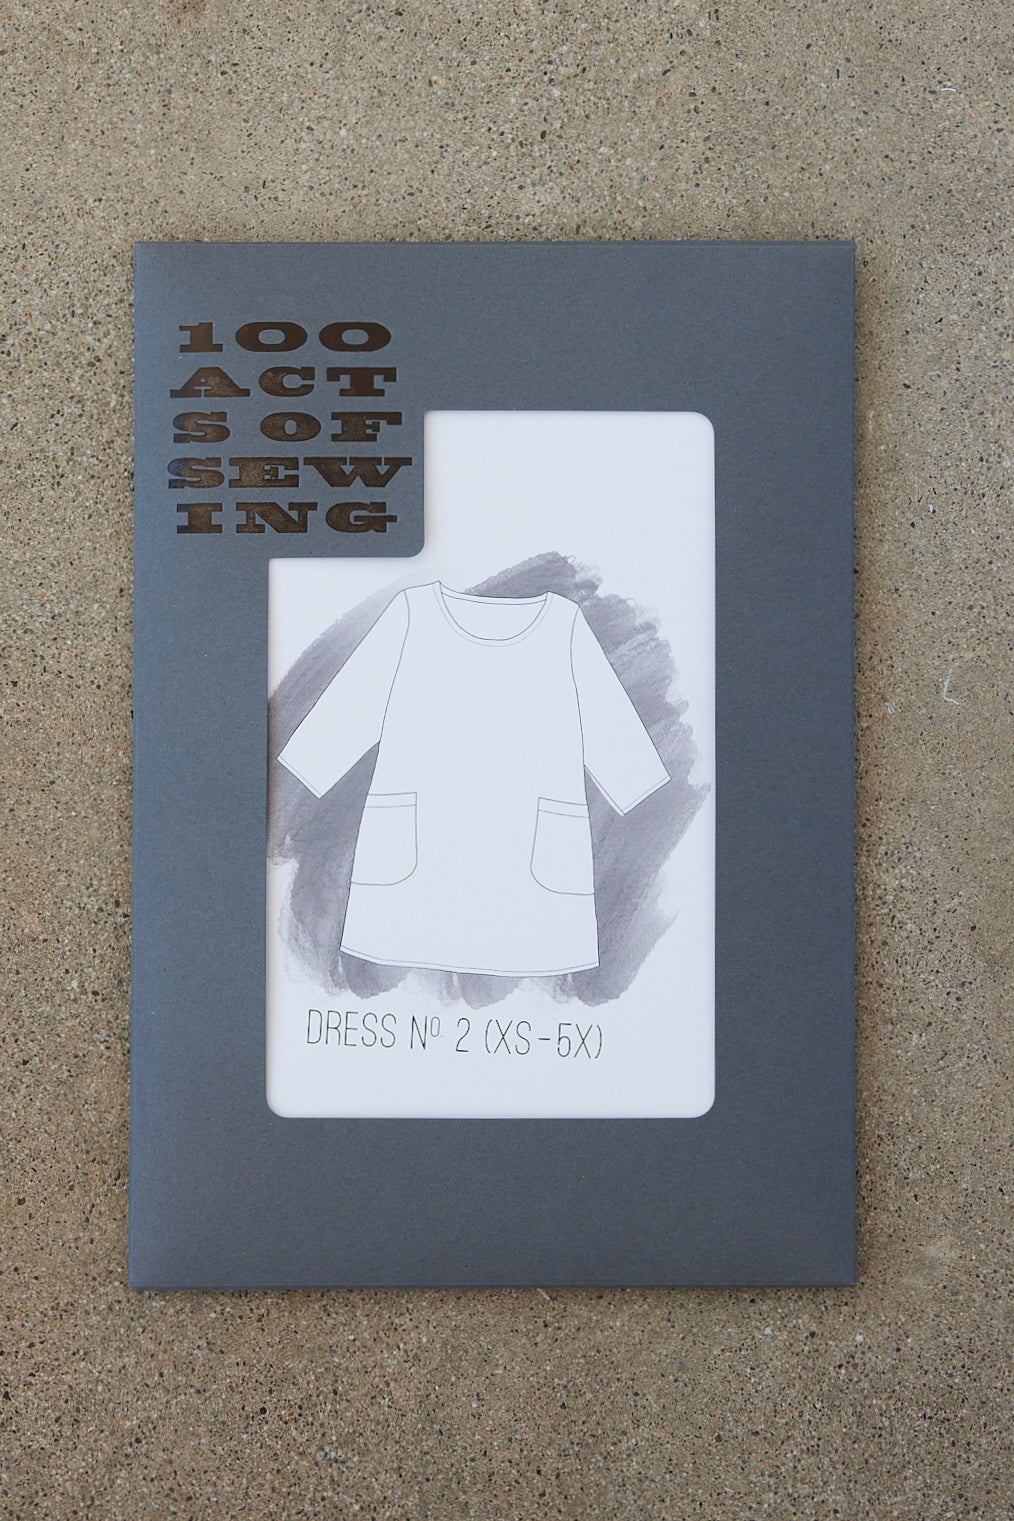 100 Acts of Sewing: Dress No. 2 - Print Sewing Pattern